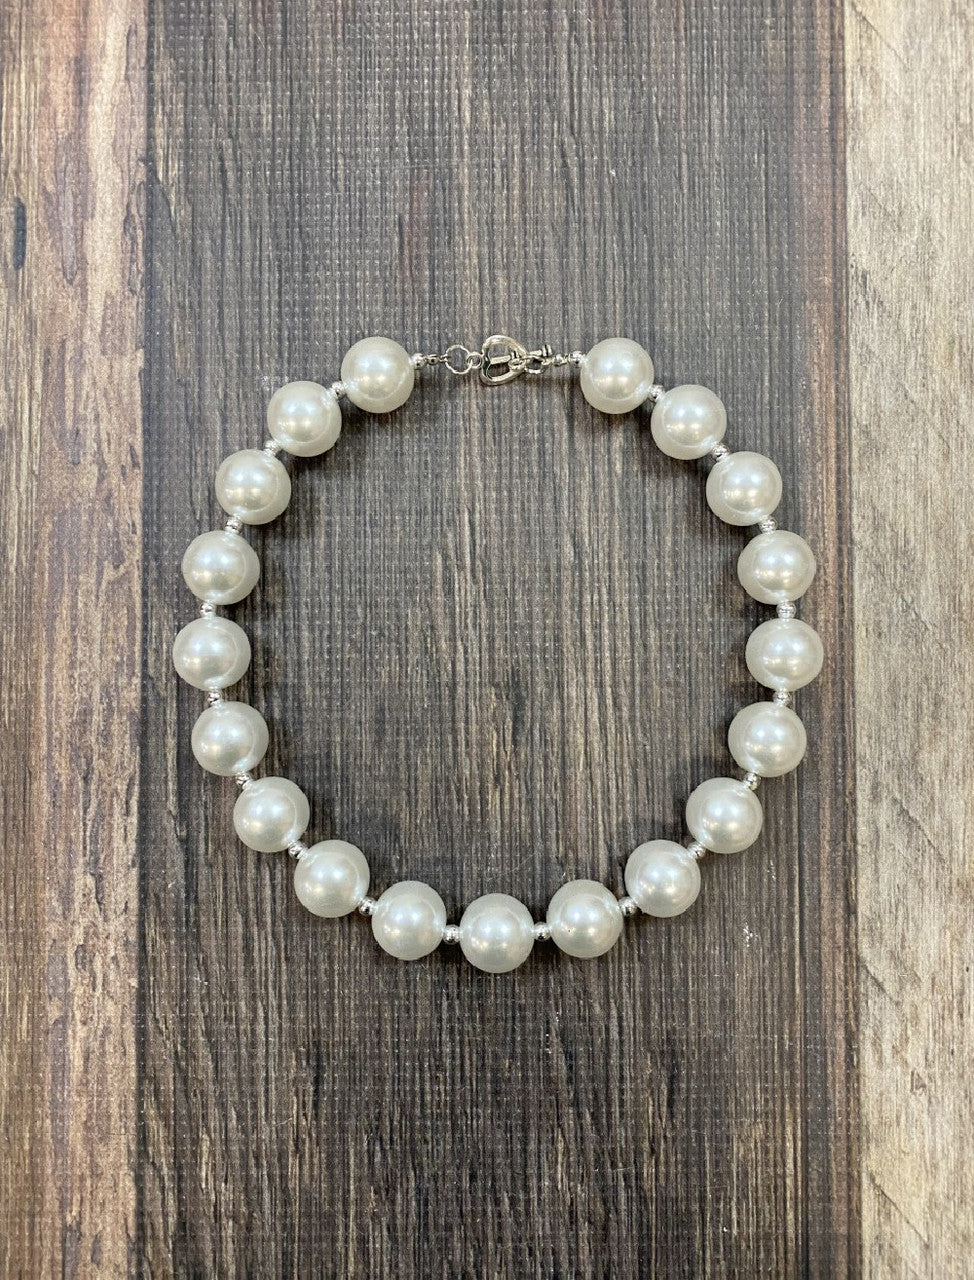 White chunky bead necklace for girls.